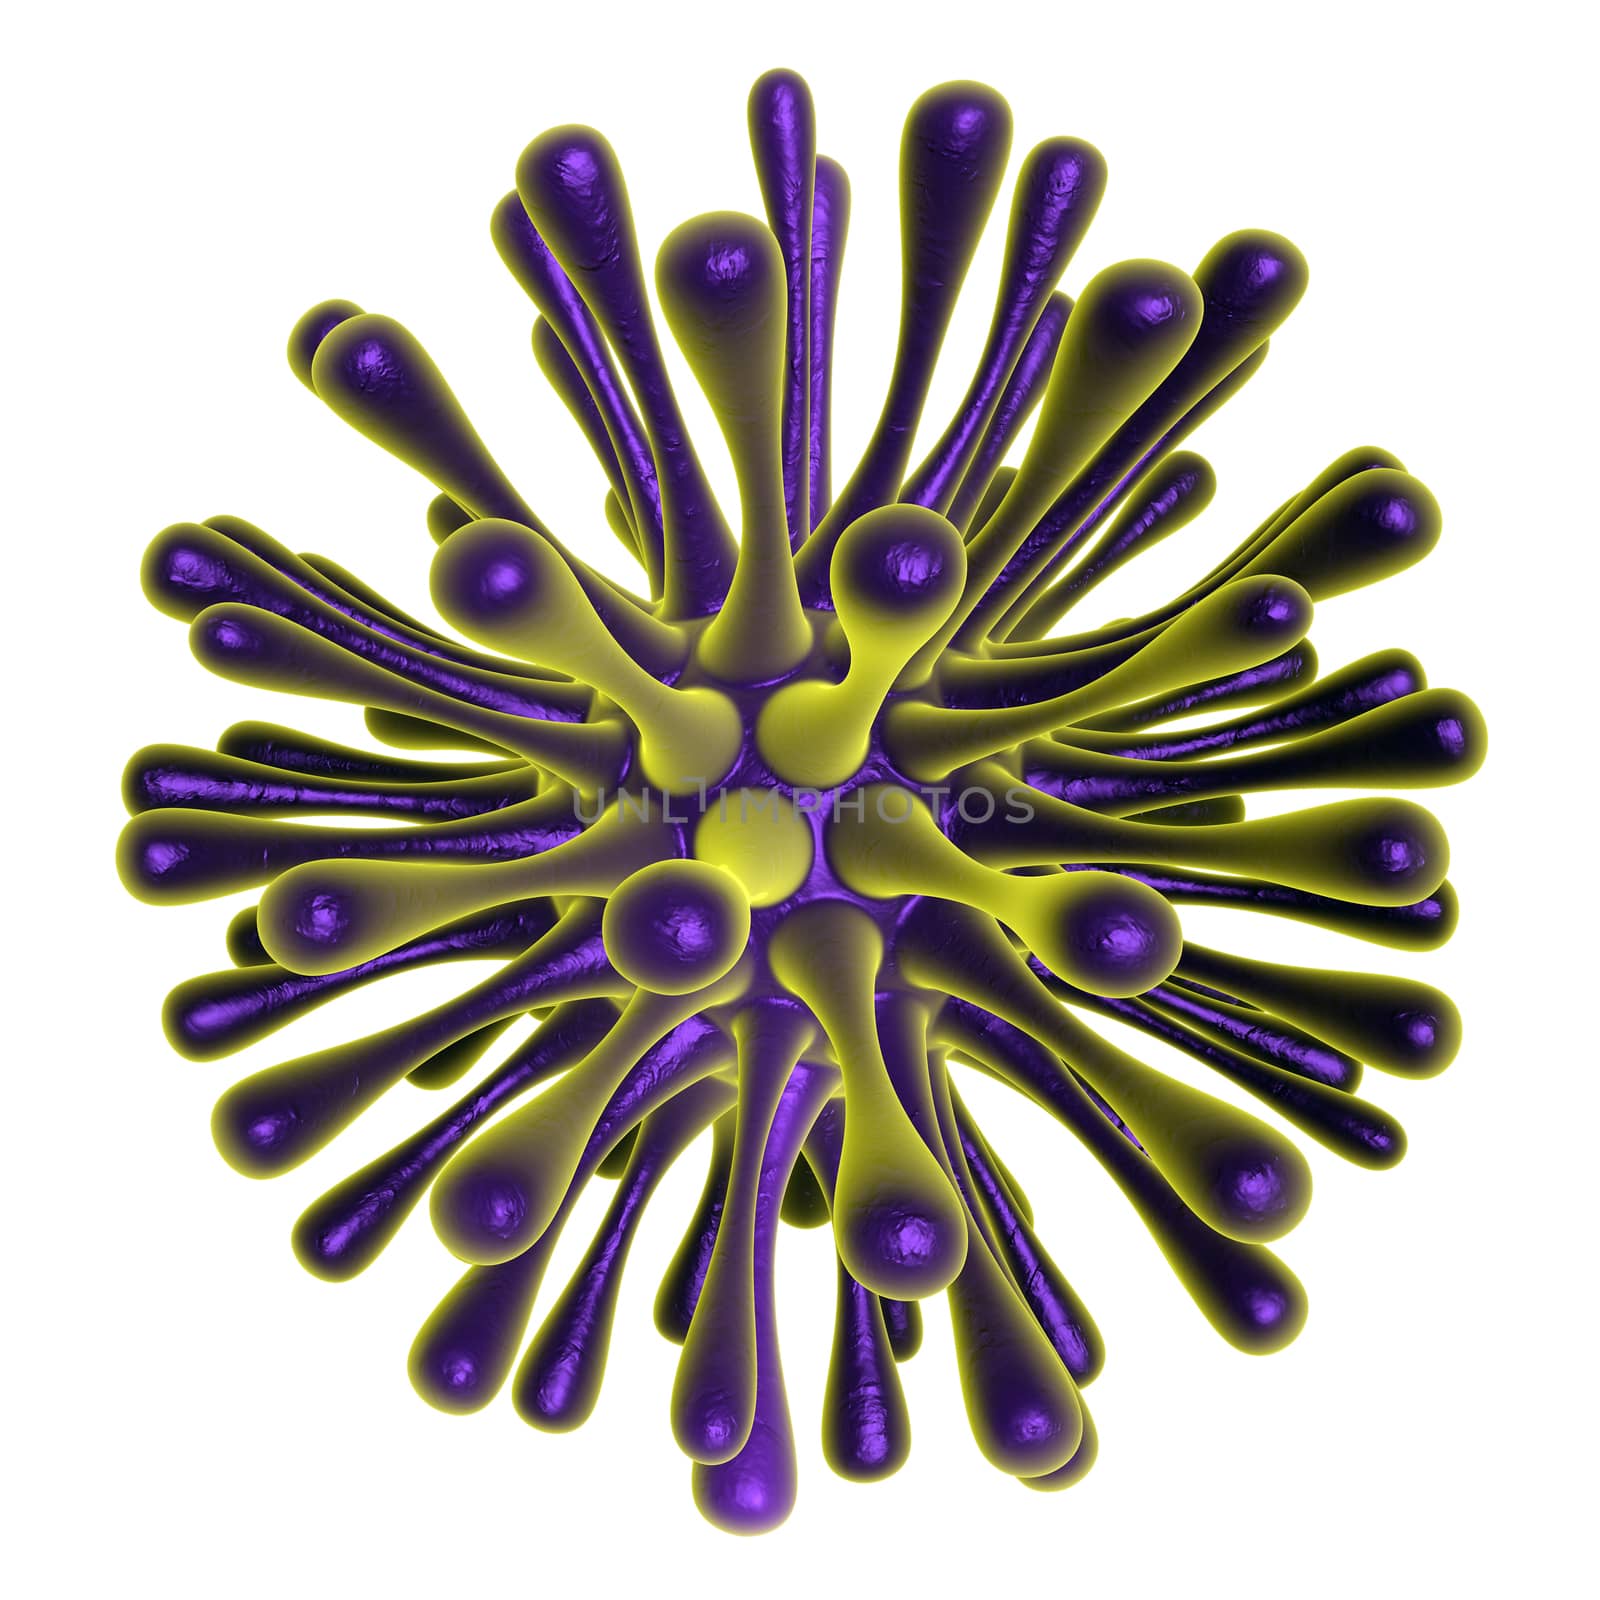 Illustration of a virus - 3D by Mibuch